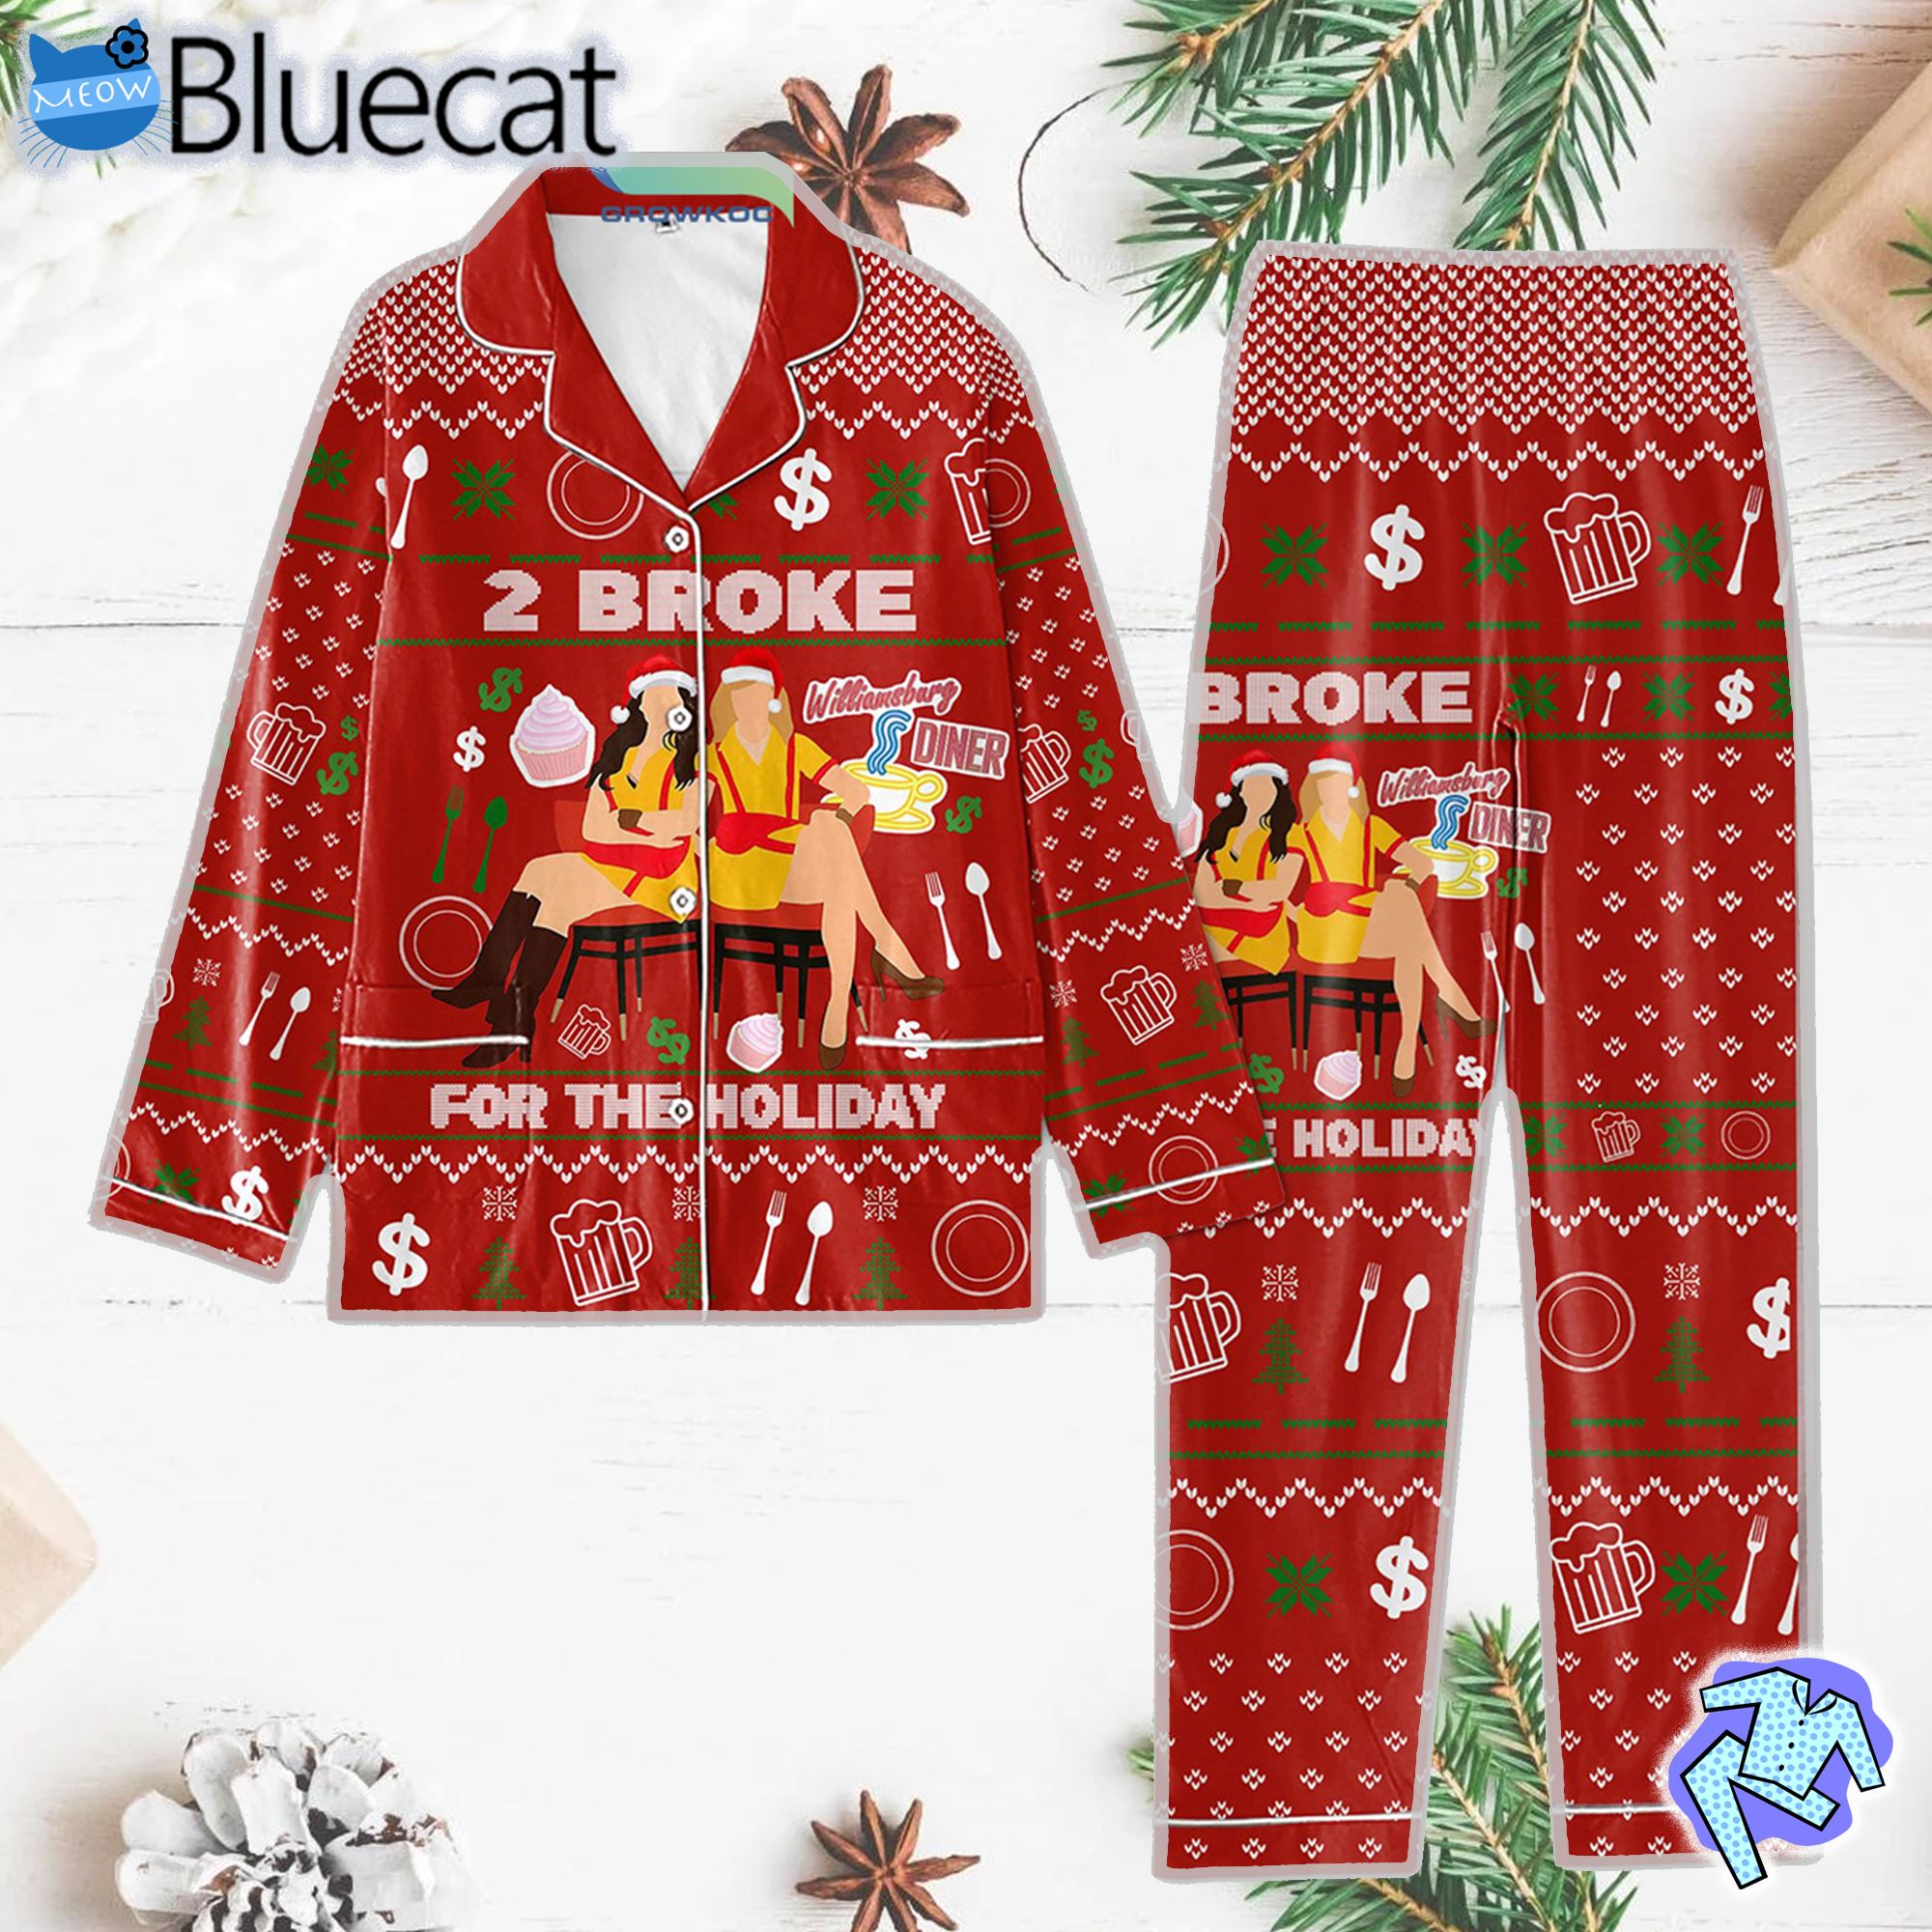 2s Brokes Fors Thes Holidays Pajamass Sets